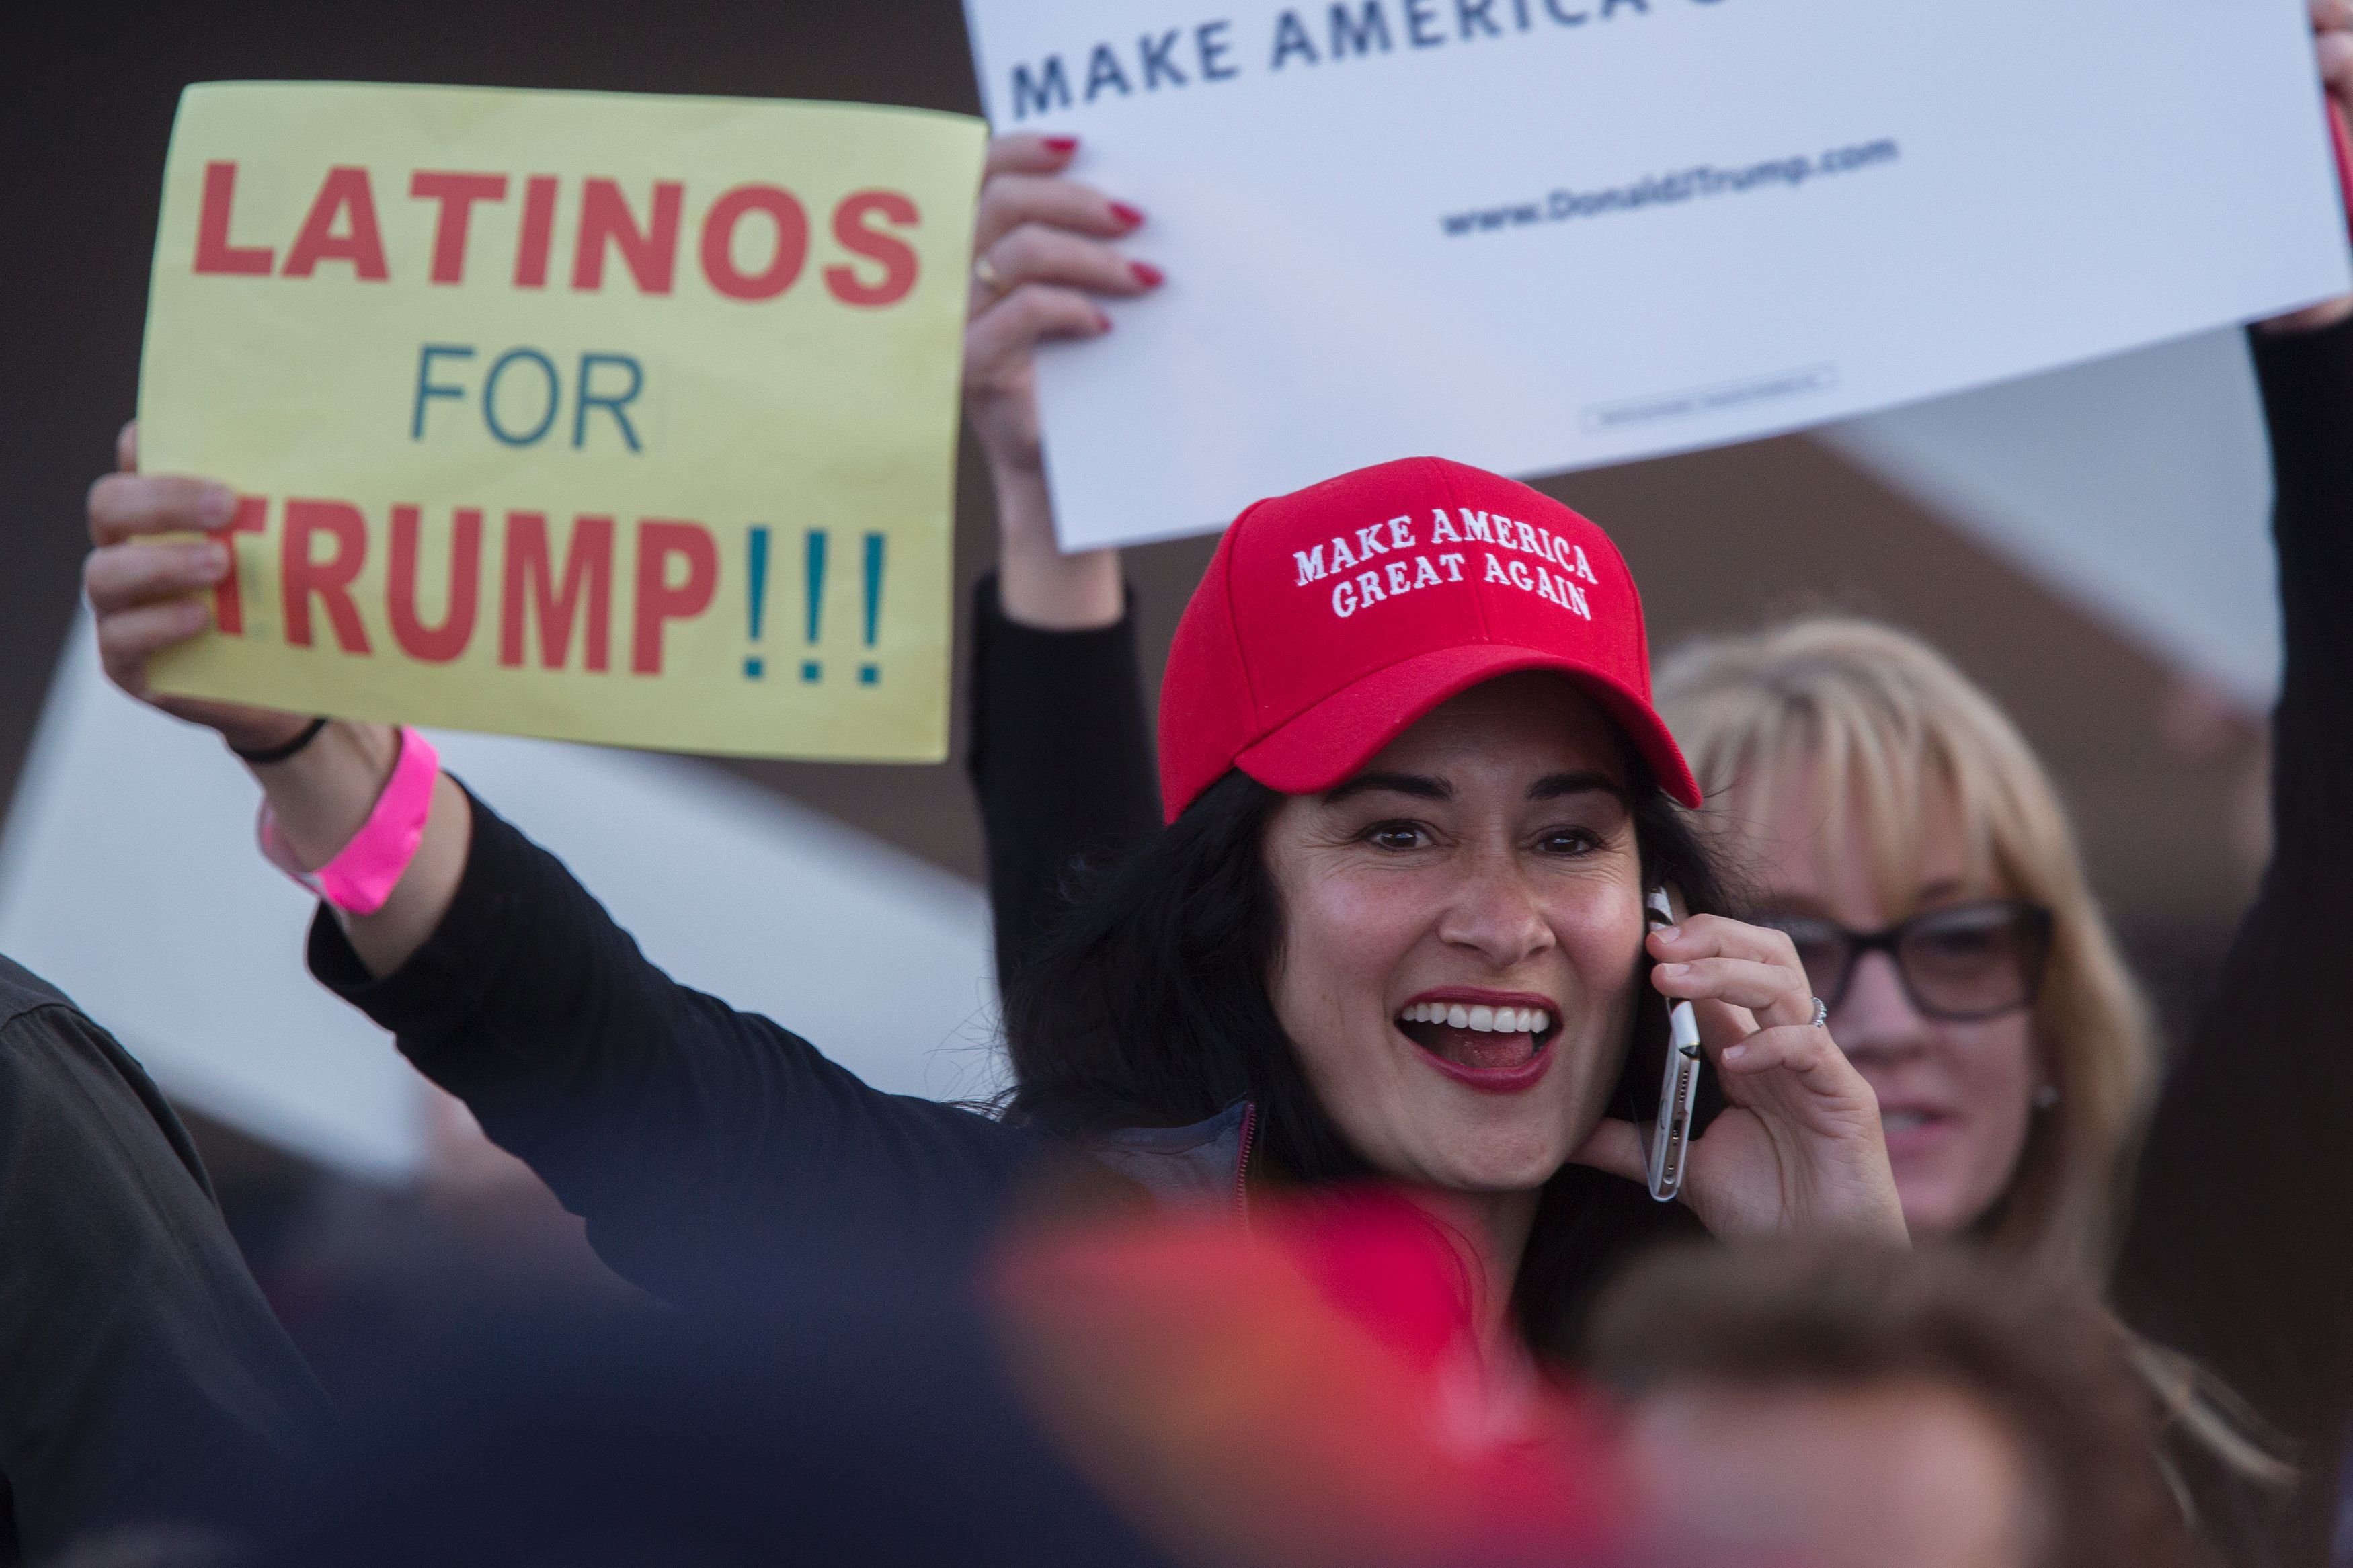 A woman holds a sign expressing Latino support for Republican presidential candidate Donald Trump at his campaign rally at the Orange County Fair and Event Center, April 28, 2016, in Costa Mesa, California. / AFP / DAVID MCNEW/ Getty Images